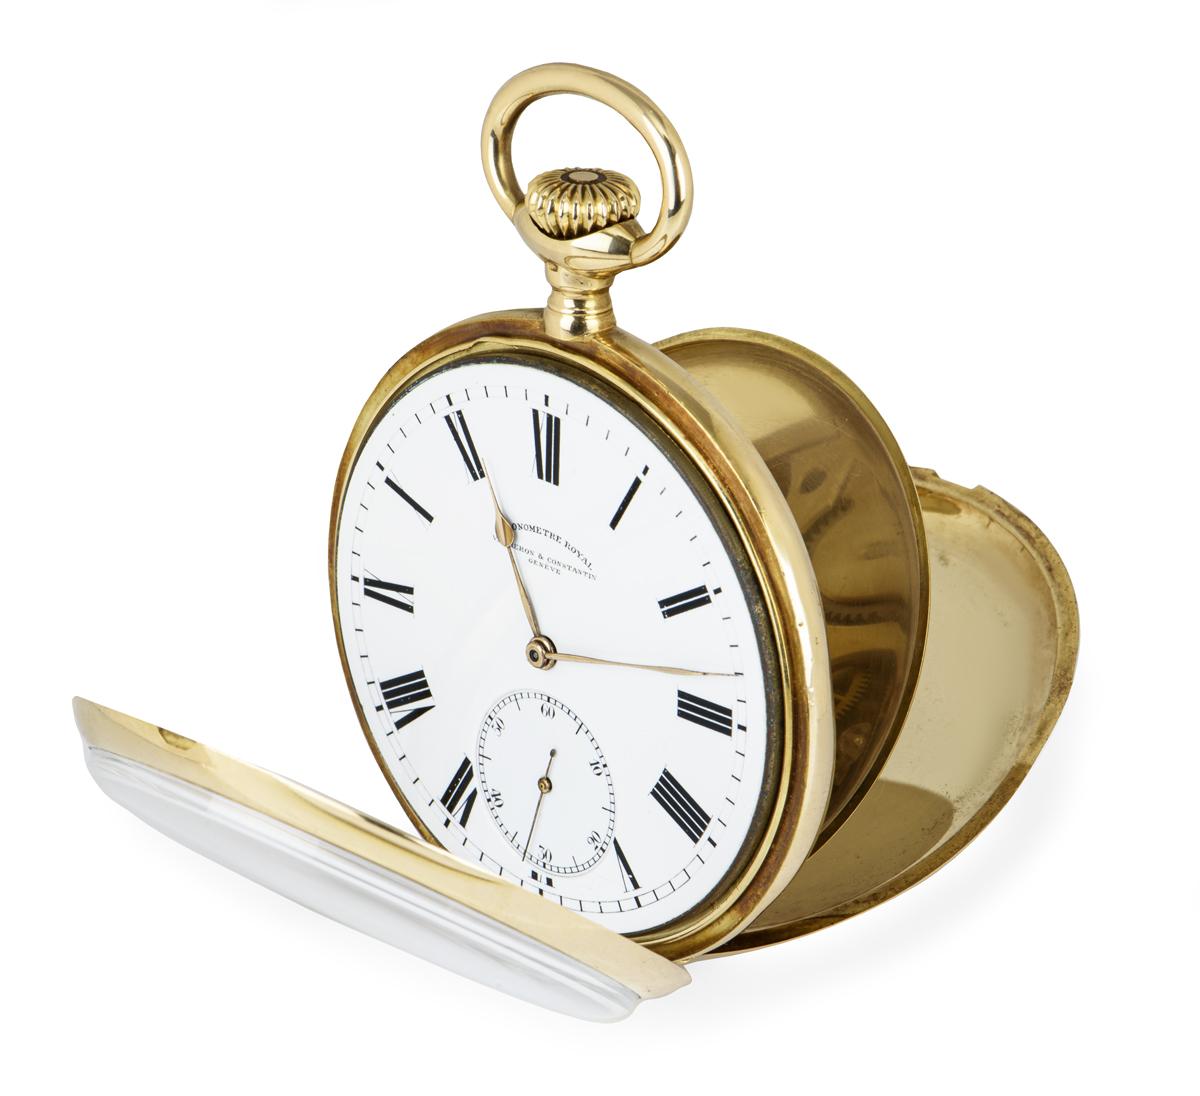 A rare 57 mm antique Chronometre Royal open face pocket watch, in yellow gold by Vacheron Constantin. First registered in Switzerland in 1907, the Chronometre Royal was made to compete with Patek Philippe.

The white enamel dial features Roman